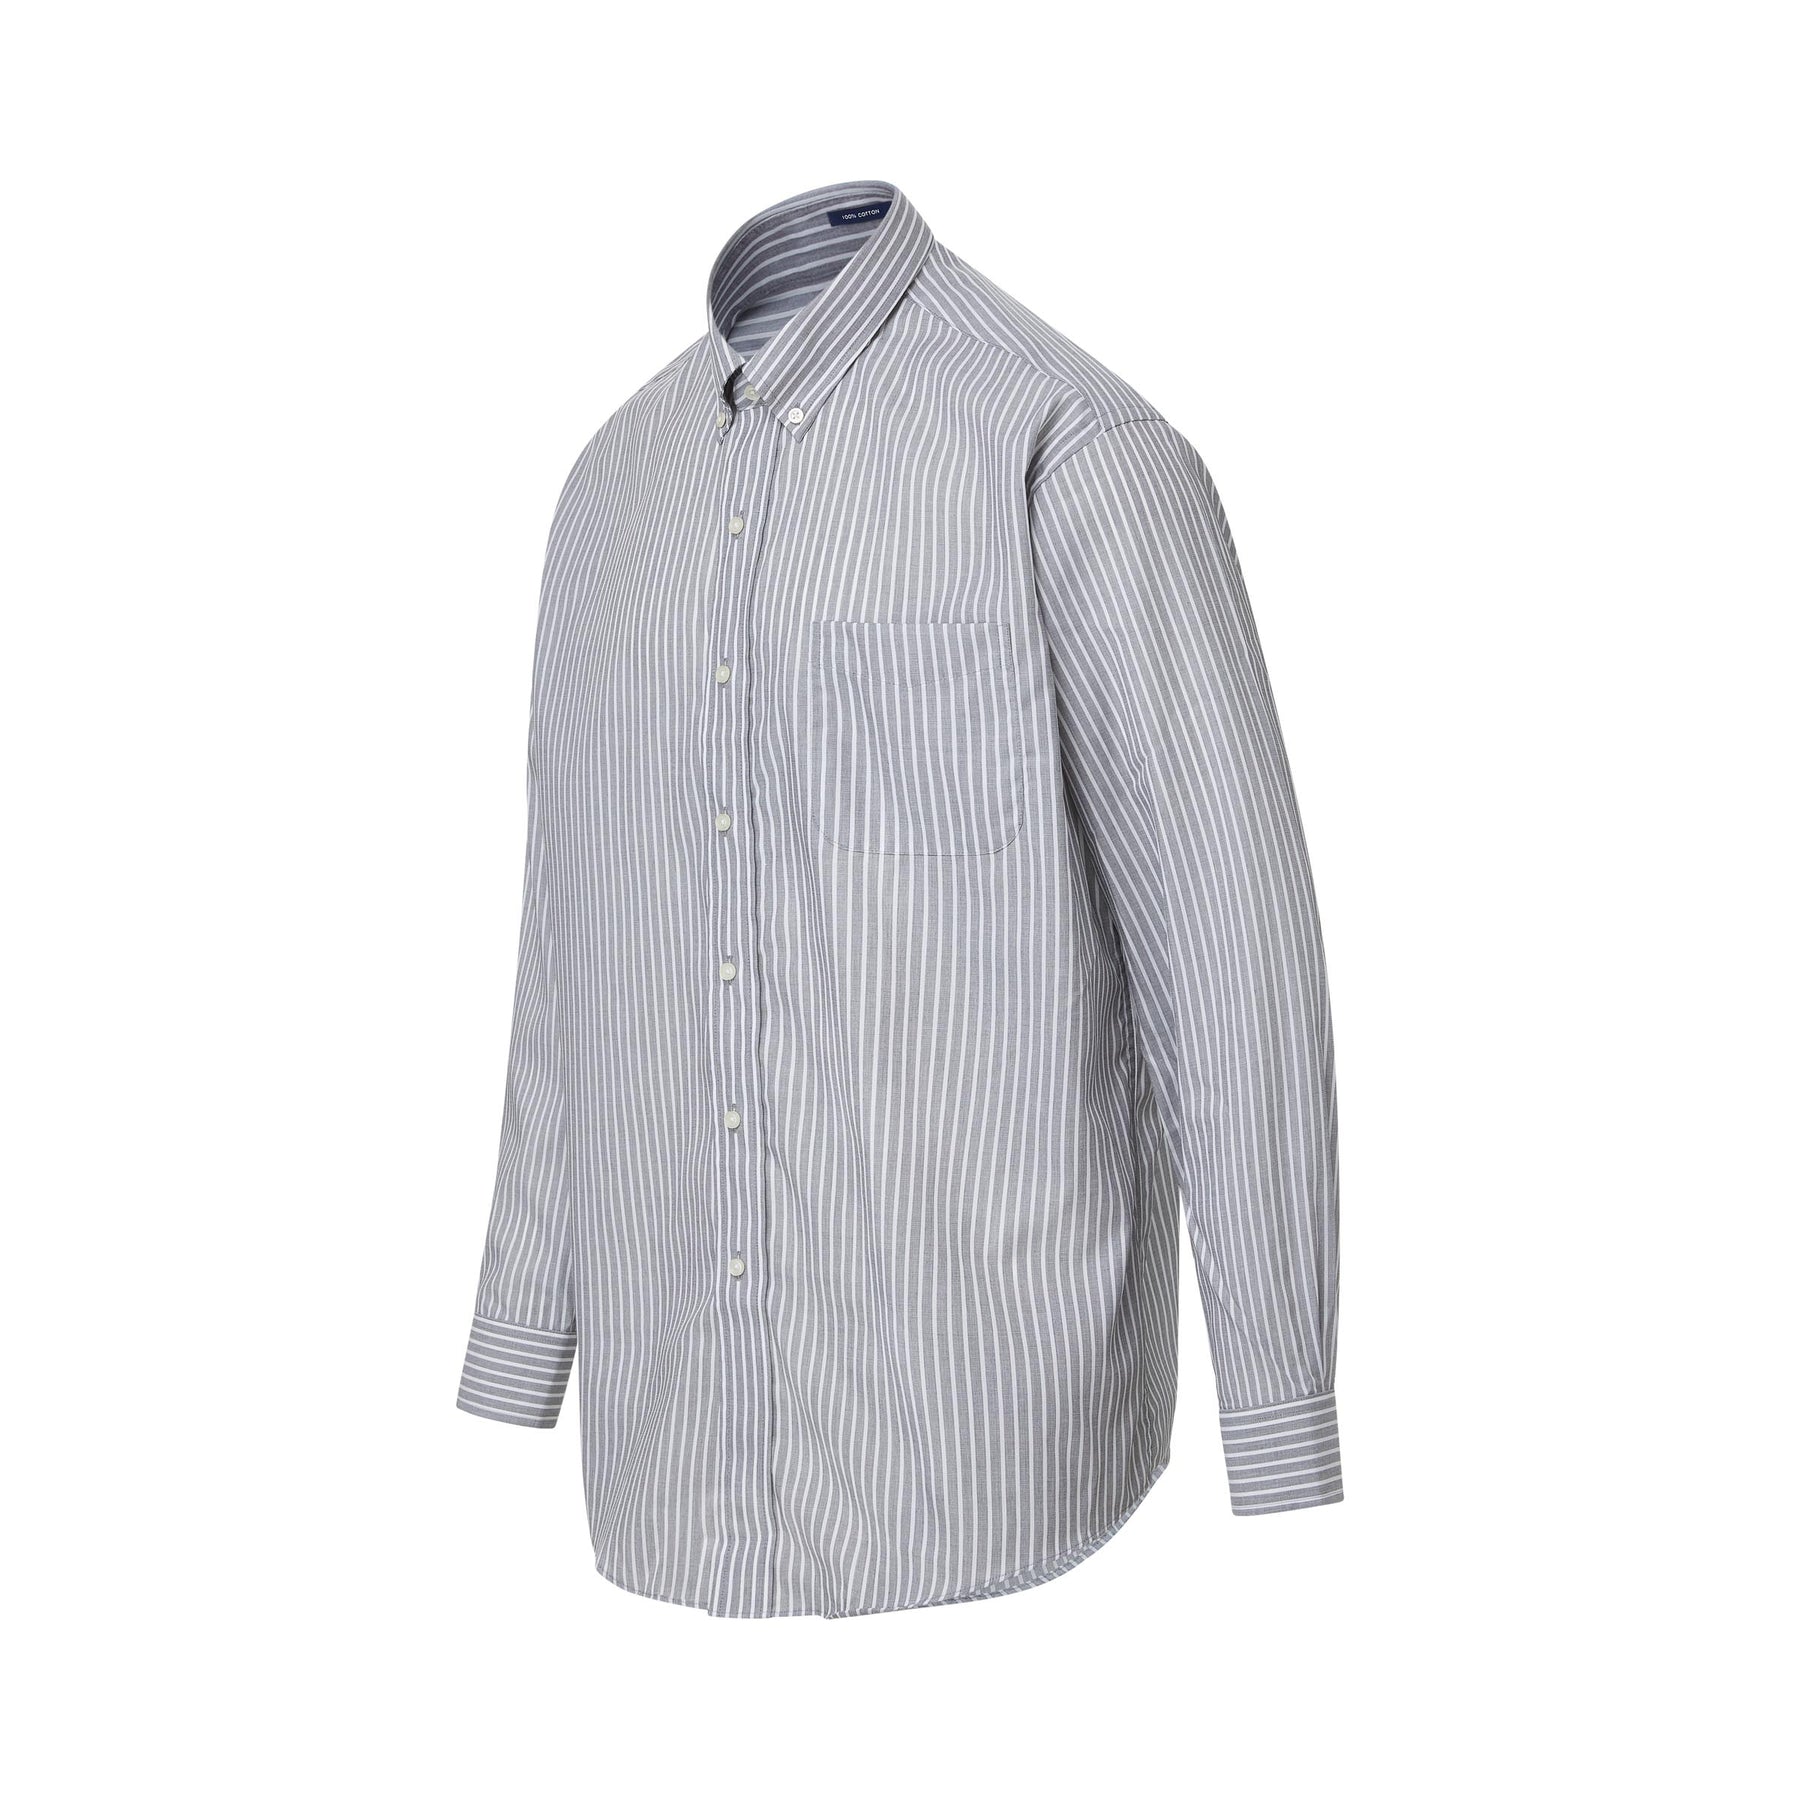 Classic Gray and White Stripe Long Sleeve Button Down Collar Shirt with Magnetic Closures